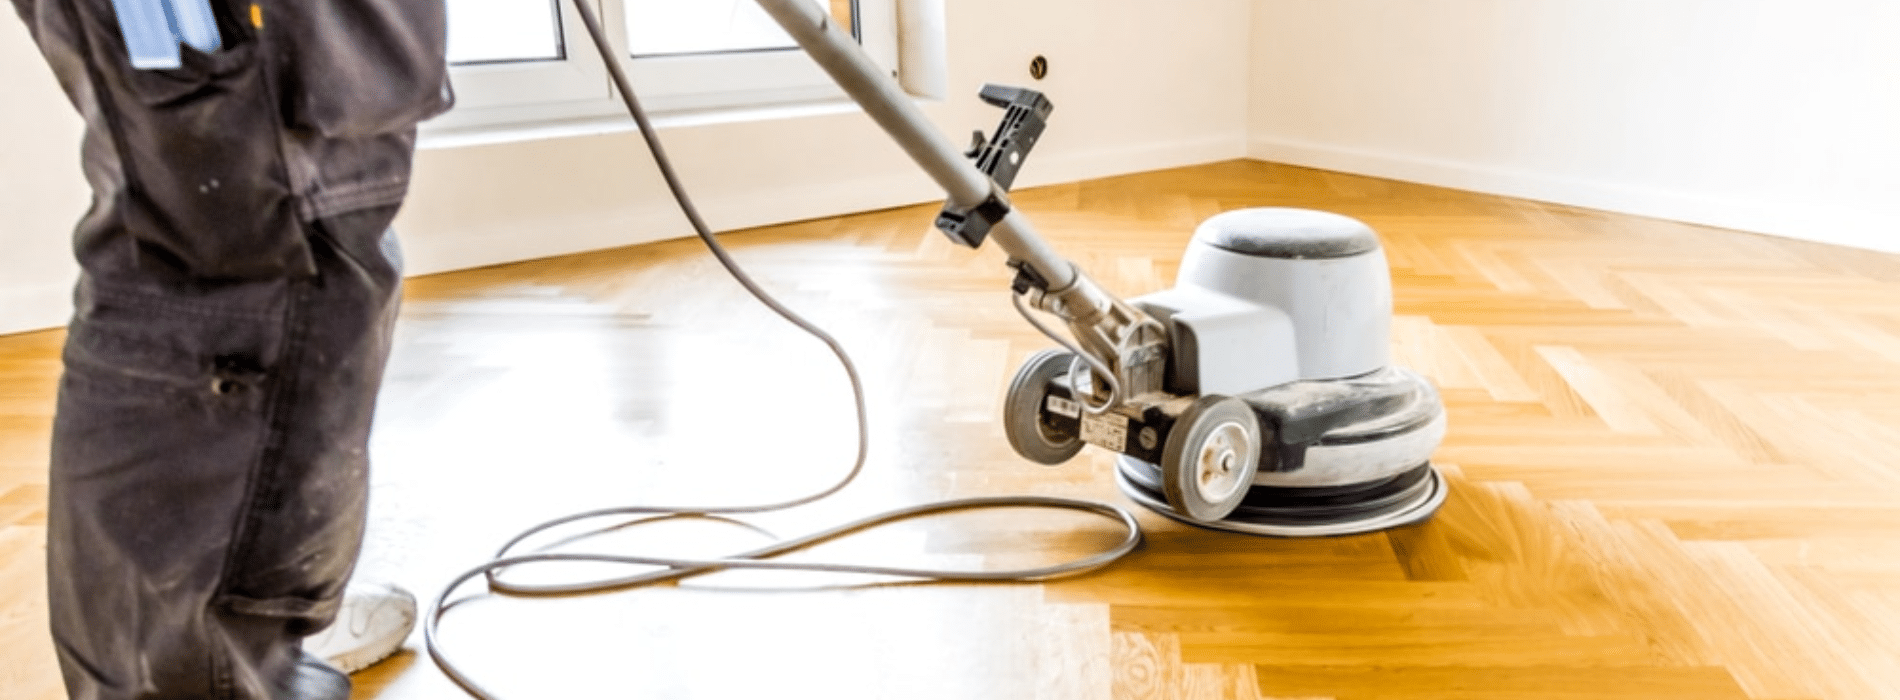 Experience the expertise of Mr Sander® as they skillfully sand a herringbone floor using the powerful 250x750 mm Bona belt sander in Finchley Church End, N3. With an impressive 2200 effect, operating at 230V and a frequency of 50/60 Hz, this professional-grade equipment ensures a clean and efficient result.